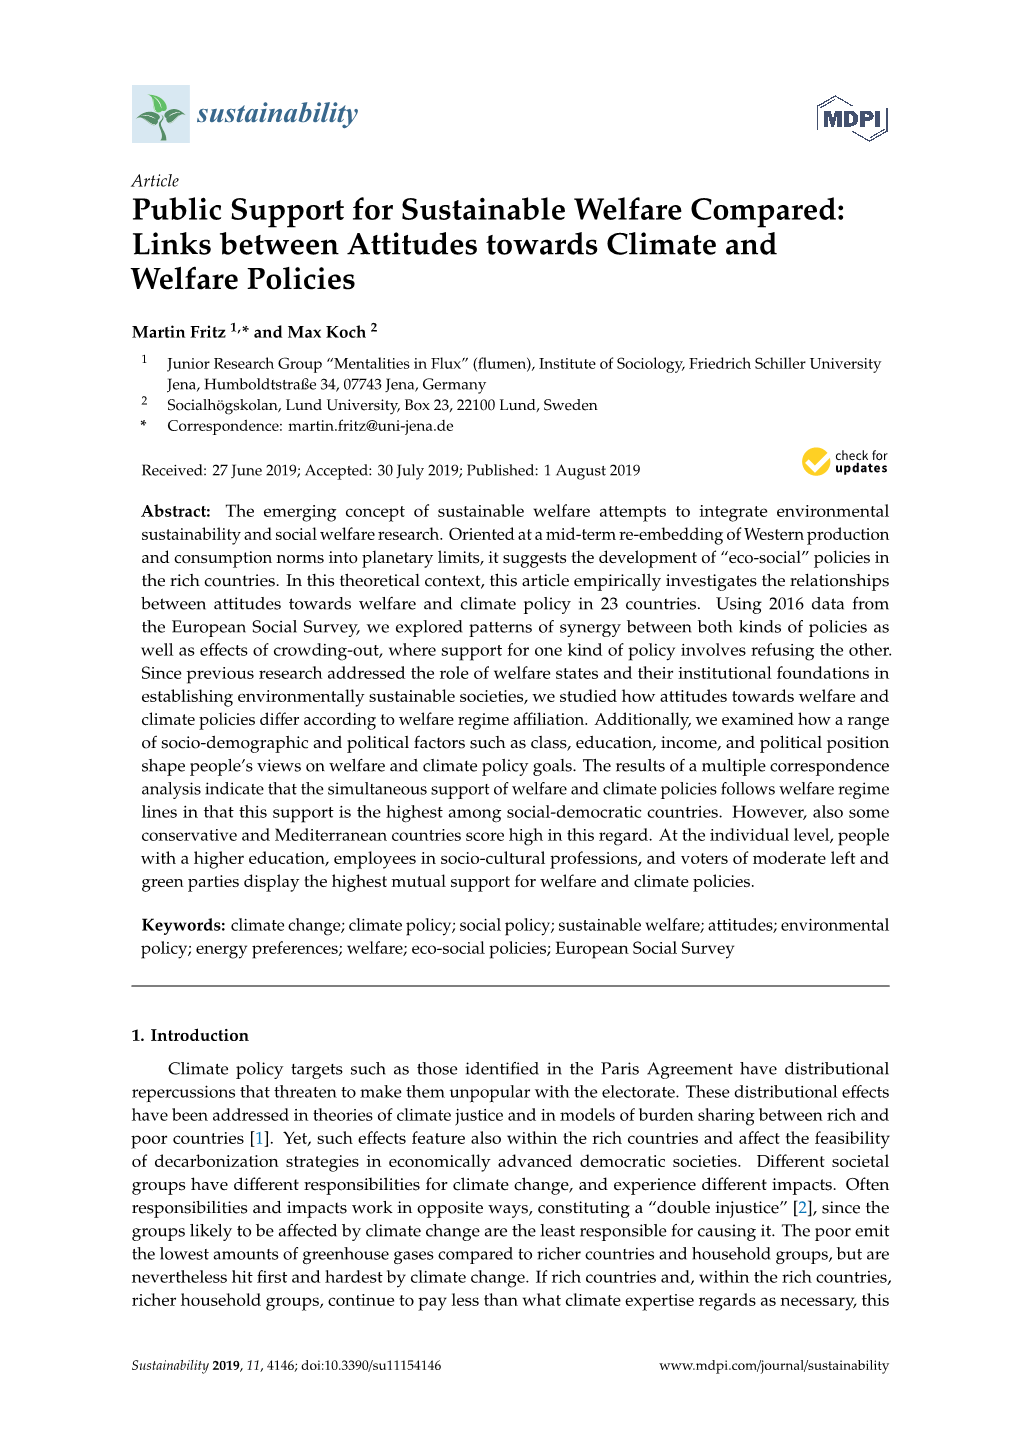 Links Between Attitudes Towards Climate and Welfare Policies